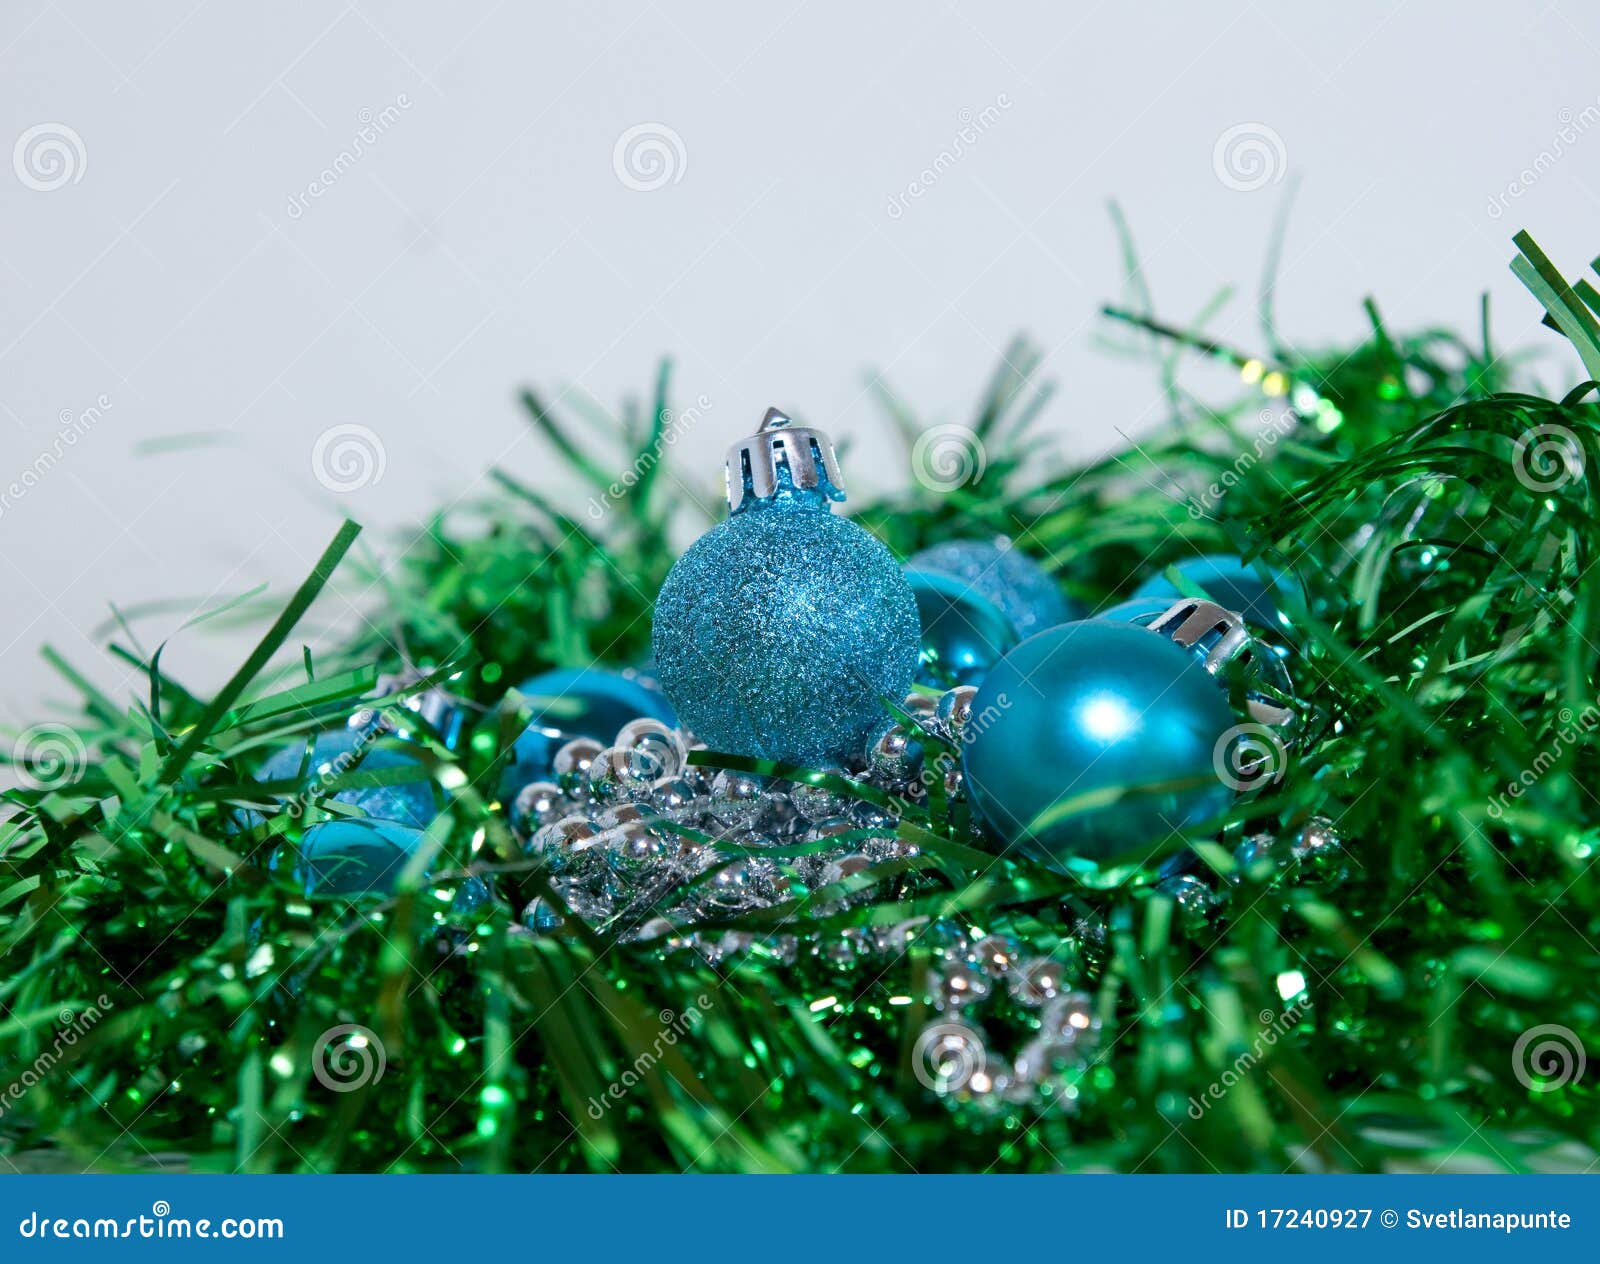 Blue And Green Christmas Decorations Royalty Free Stock Photography